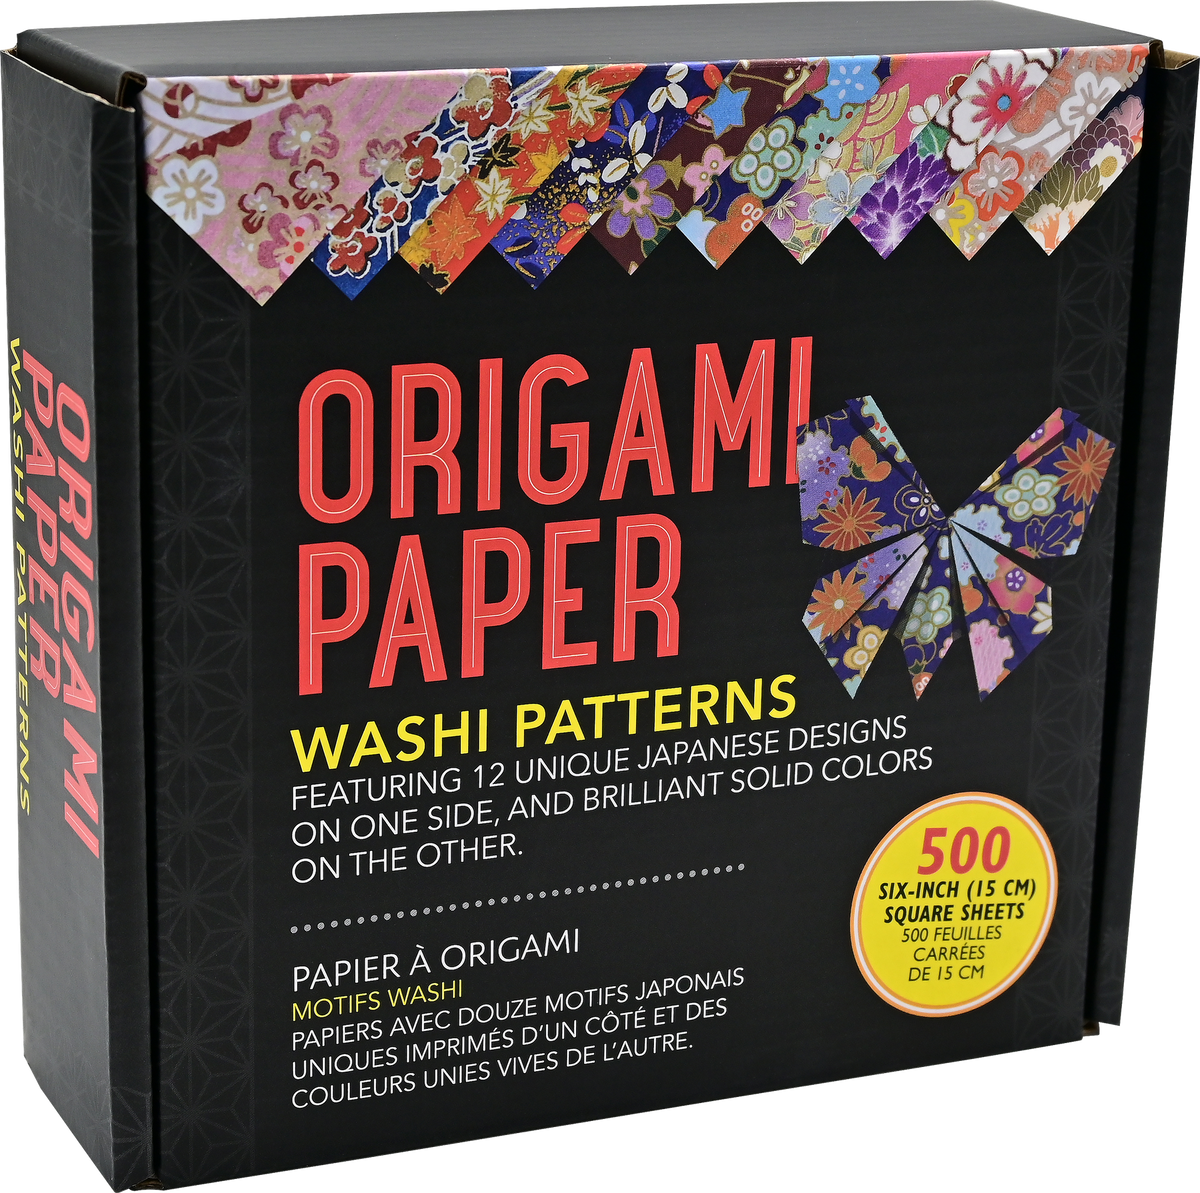 Peter Pauper Origami Paper Washi Patters